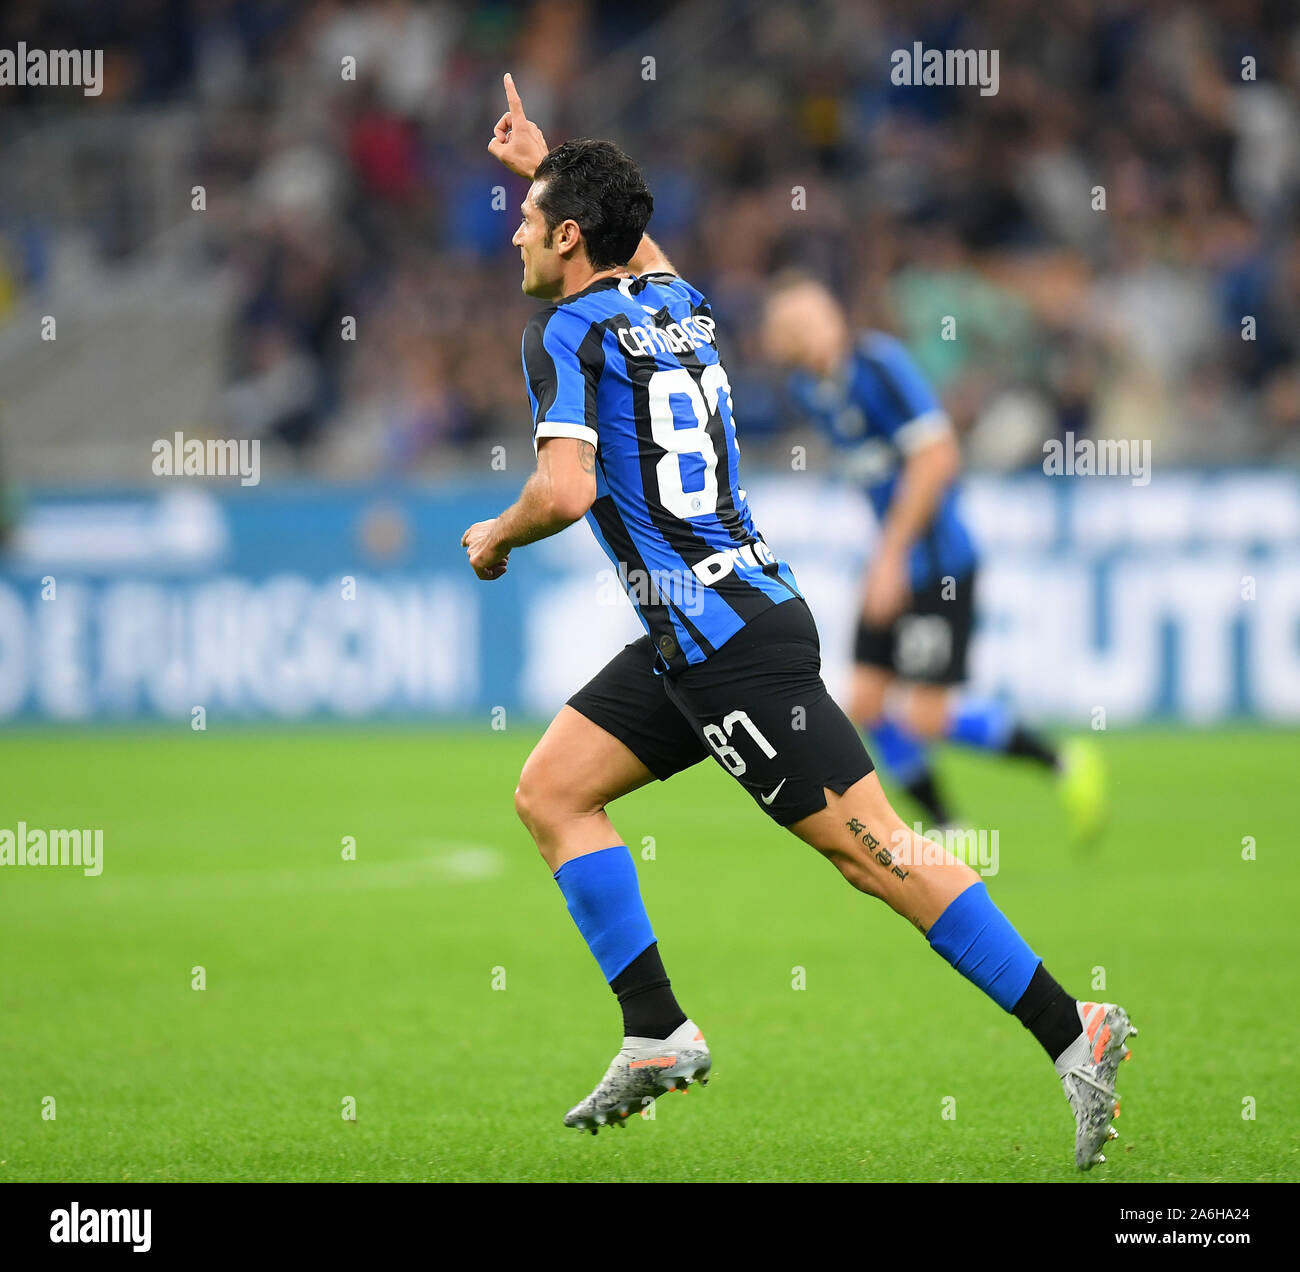 Milan, Italy. 26th Oct, 2019. FC Inter's Antonio Candreva celebrates during a Serie A soccer match between FC Inter and Parma in Milan, Italy, Oct. 26, 2019. Credit: Alberto Lingria/Xinhua/Alamy Live News Stock Photo